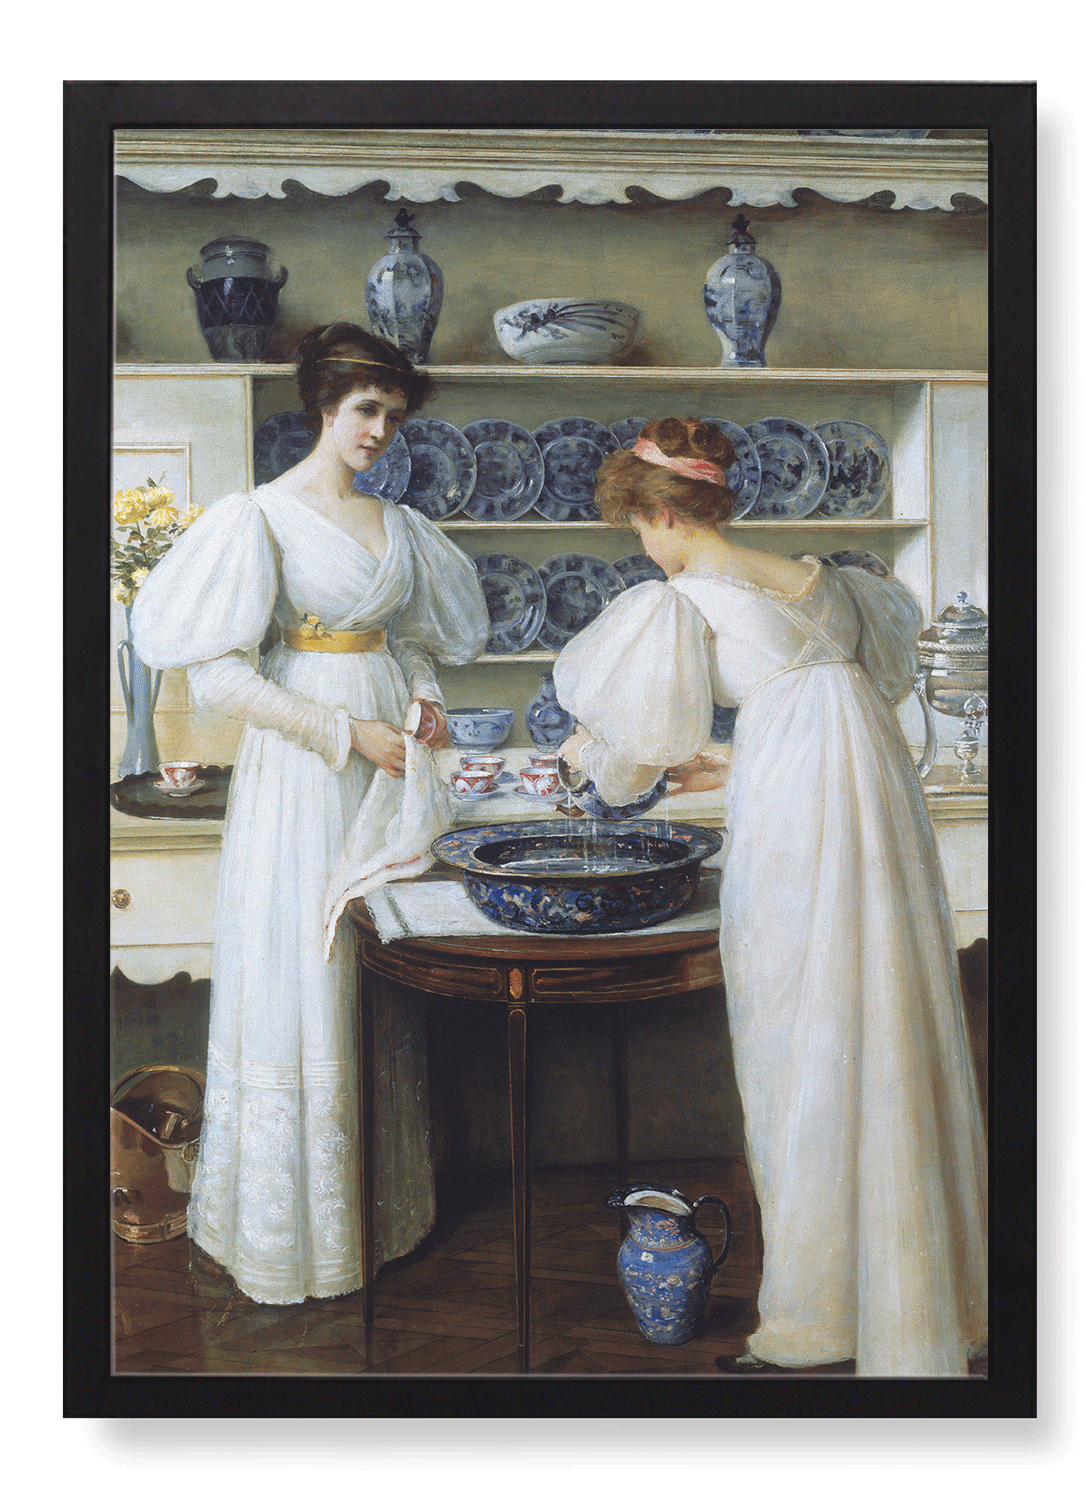 BLUE AND WHITE (1896)